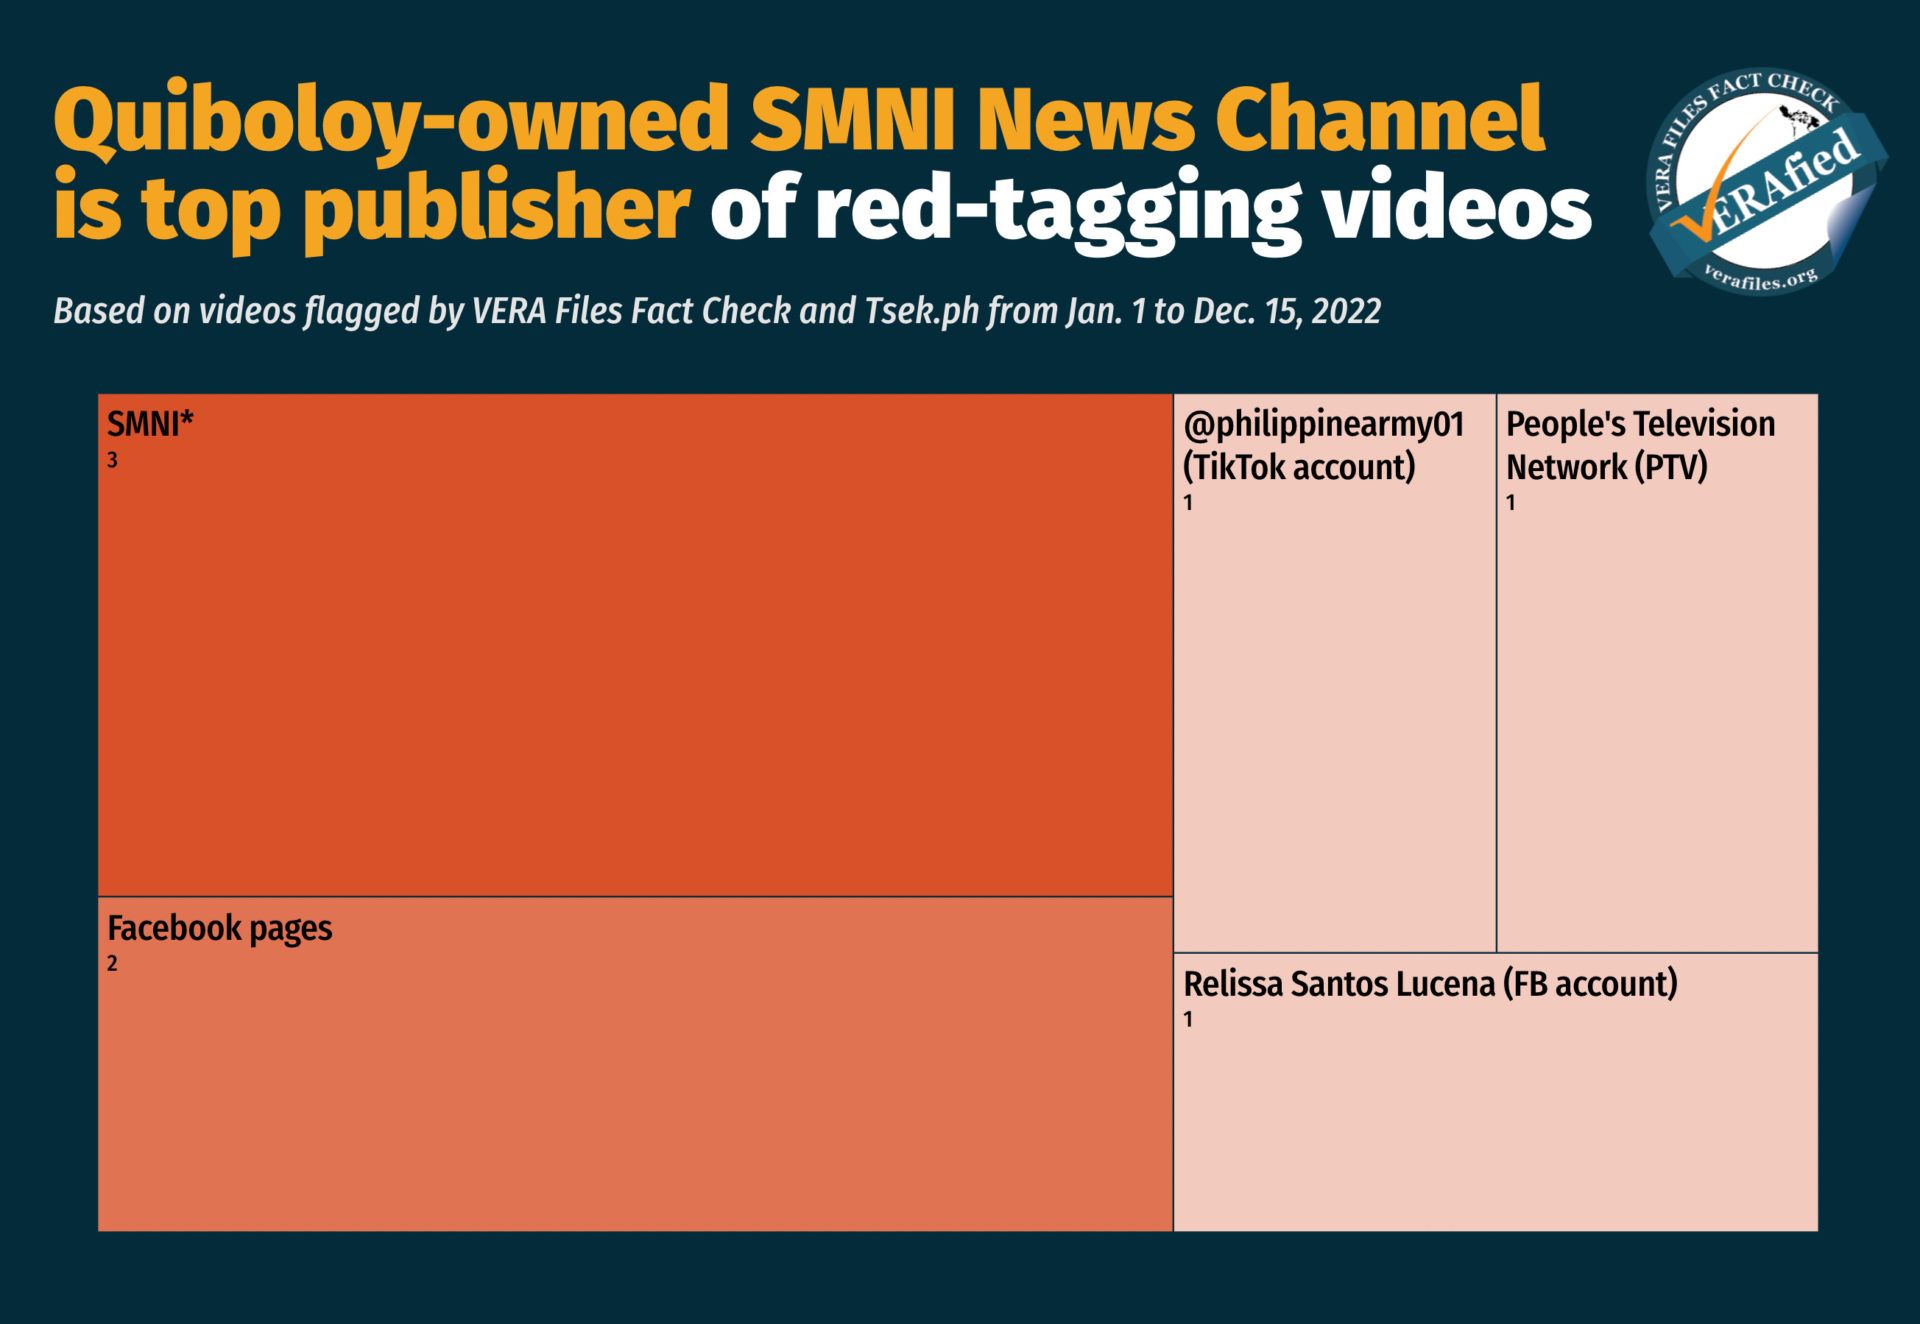 Quiboloy-owned SMNI News Channel is top publisher of red-tagging videos